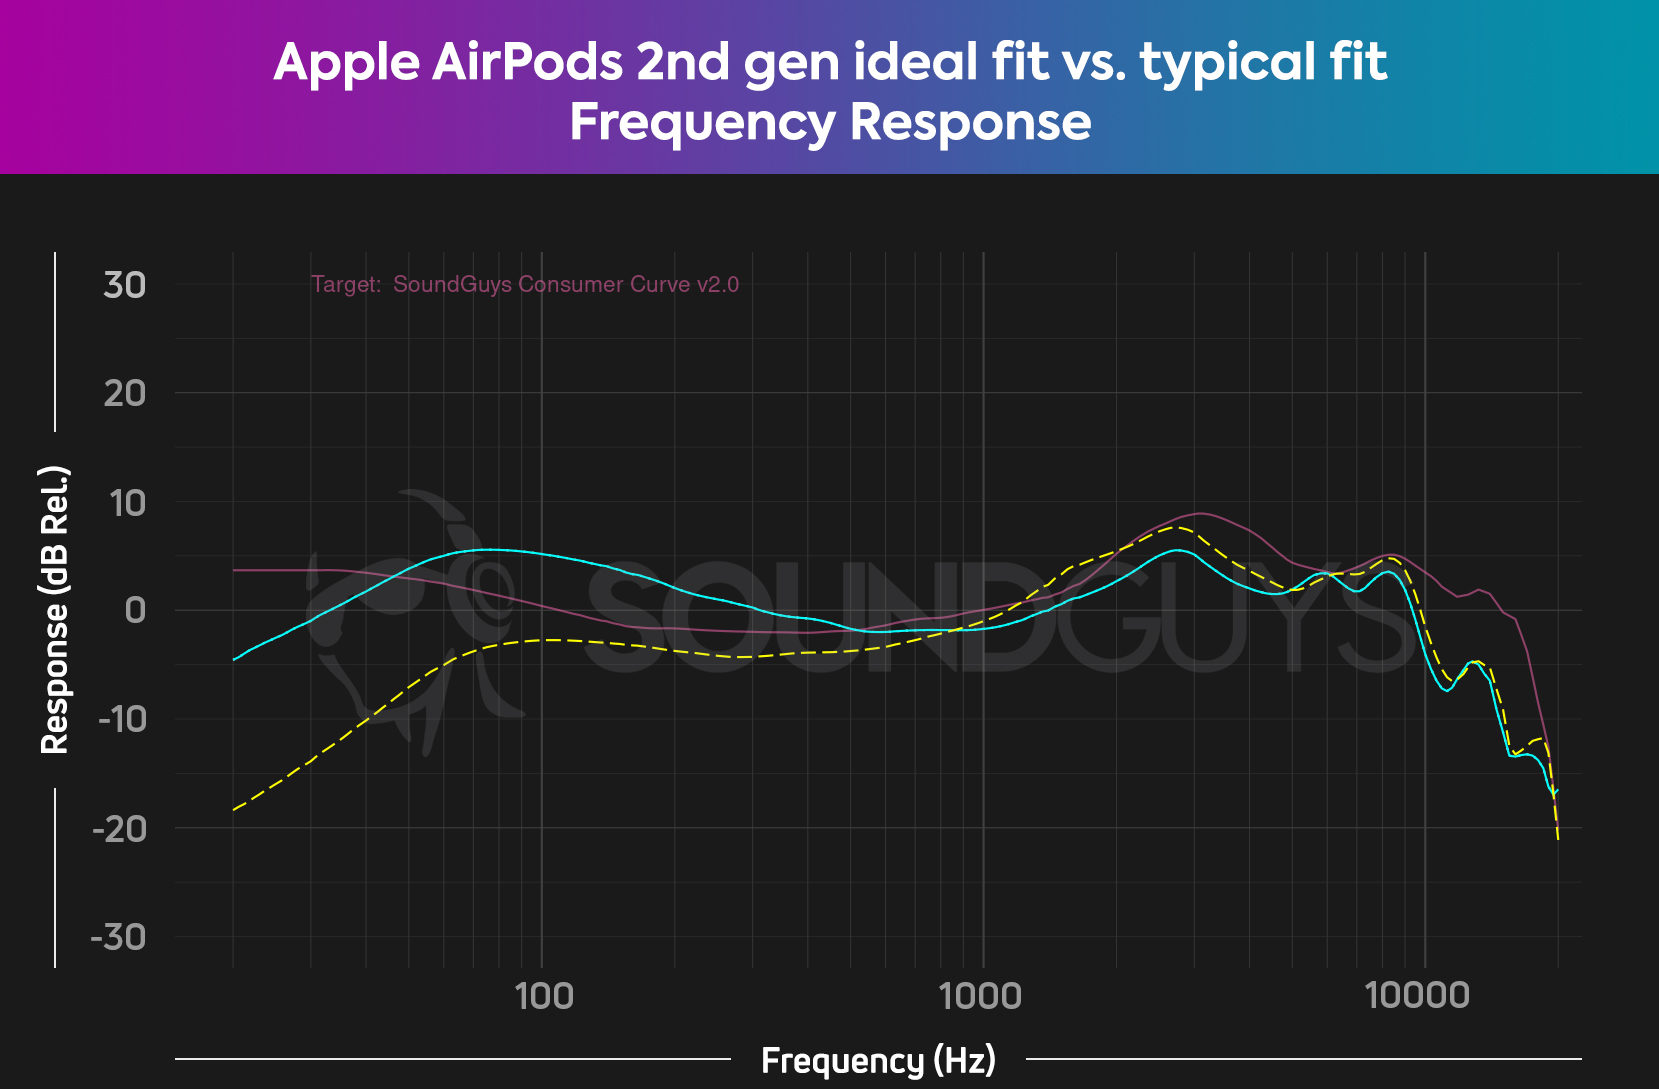 A frequency response chart showing how the Apple AirPods 2nd generation drops 10-20dB of all sounds under 1kHz depending on fit.